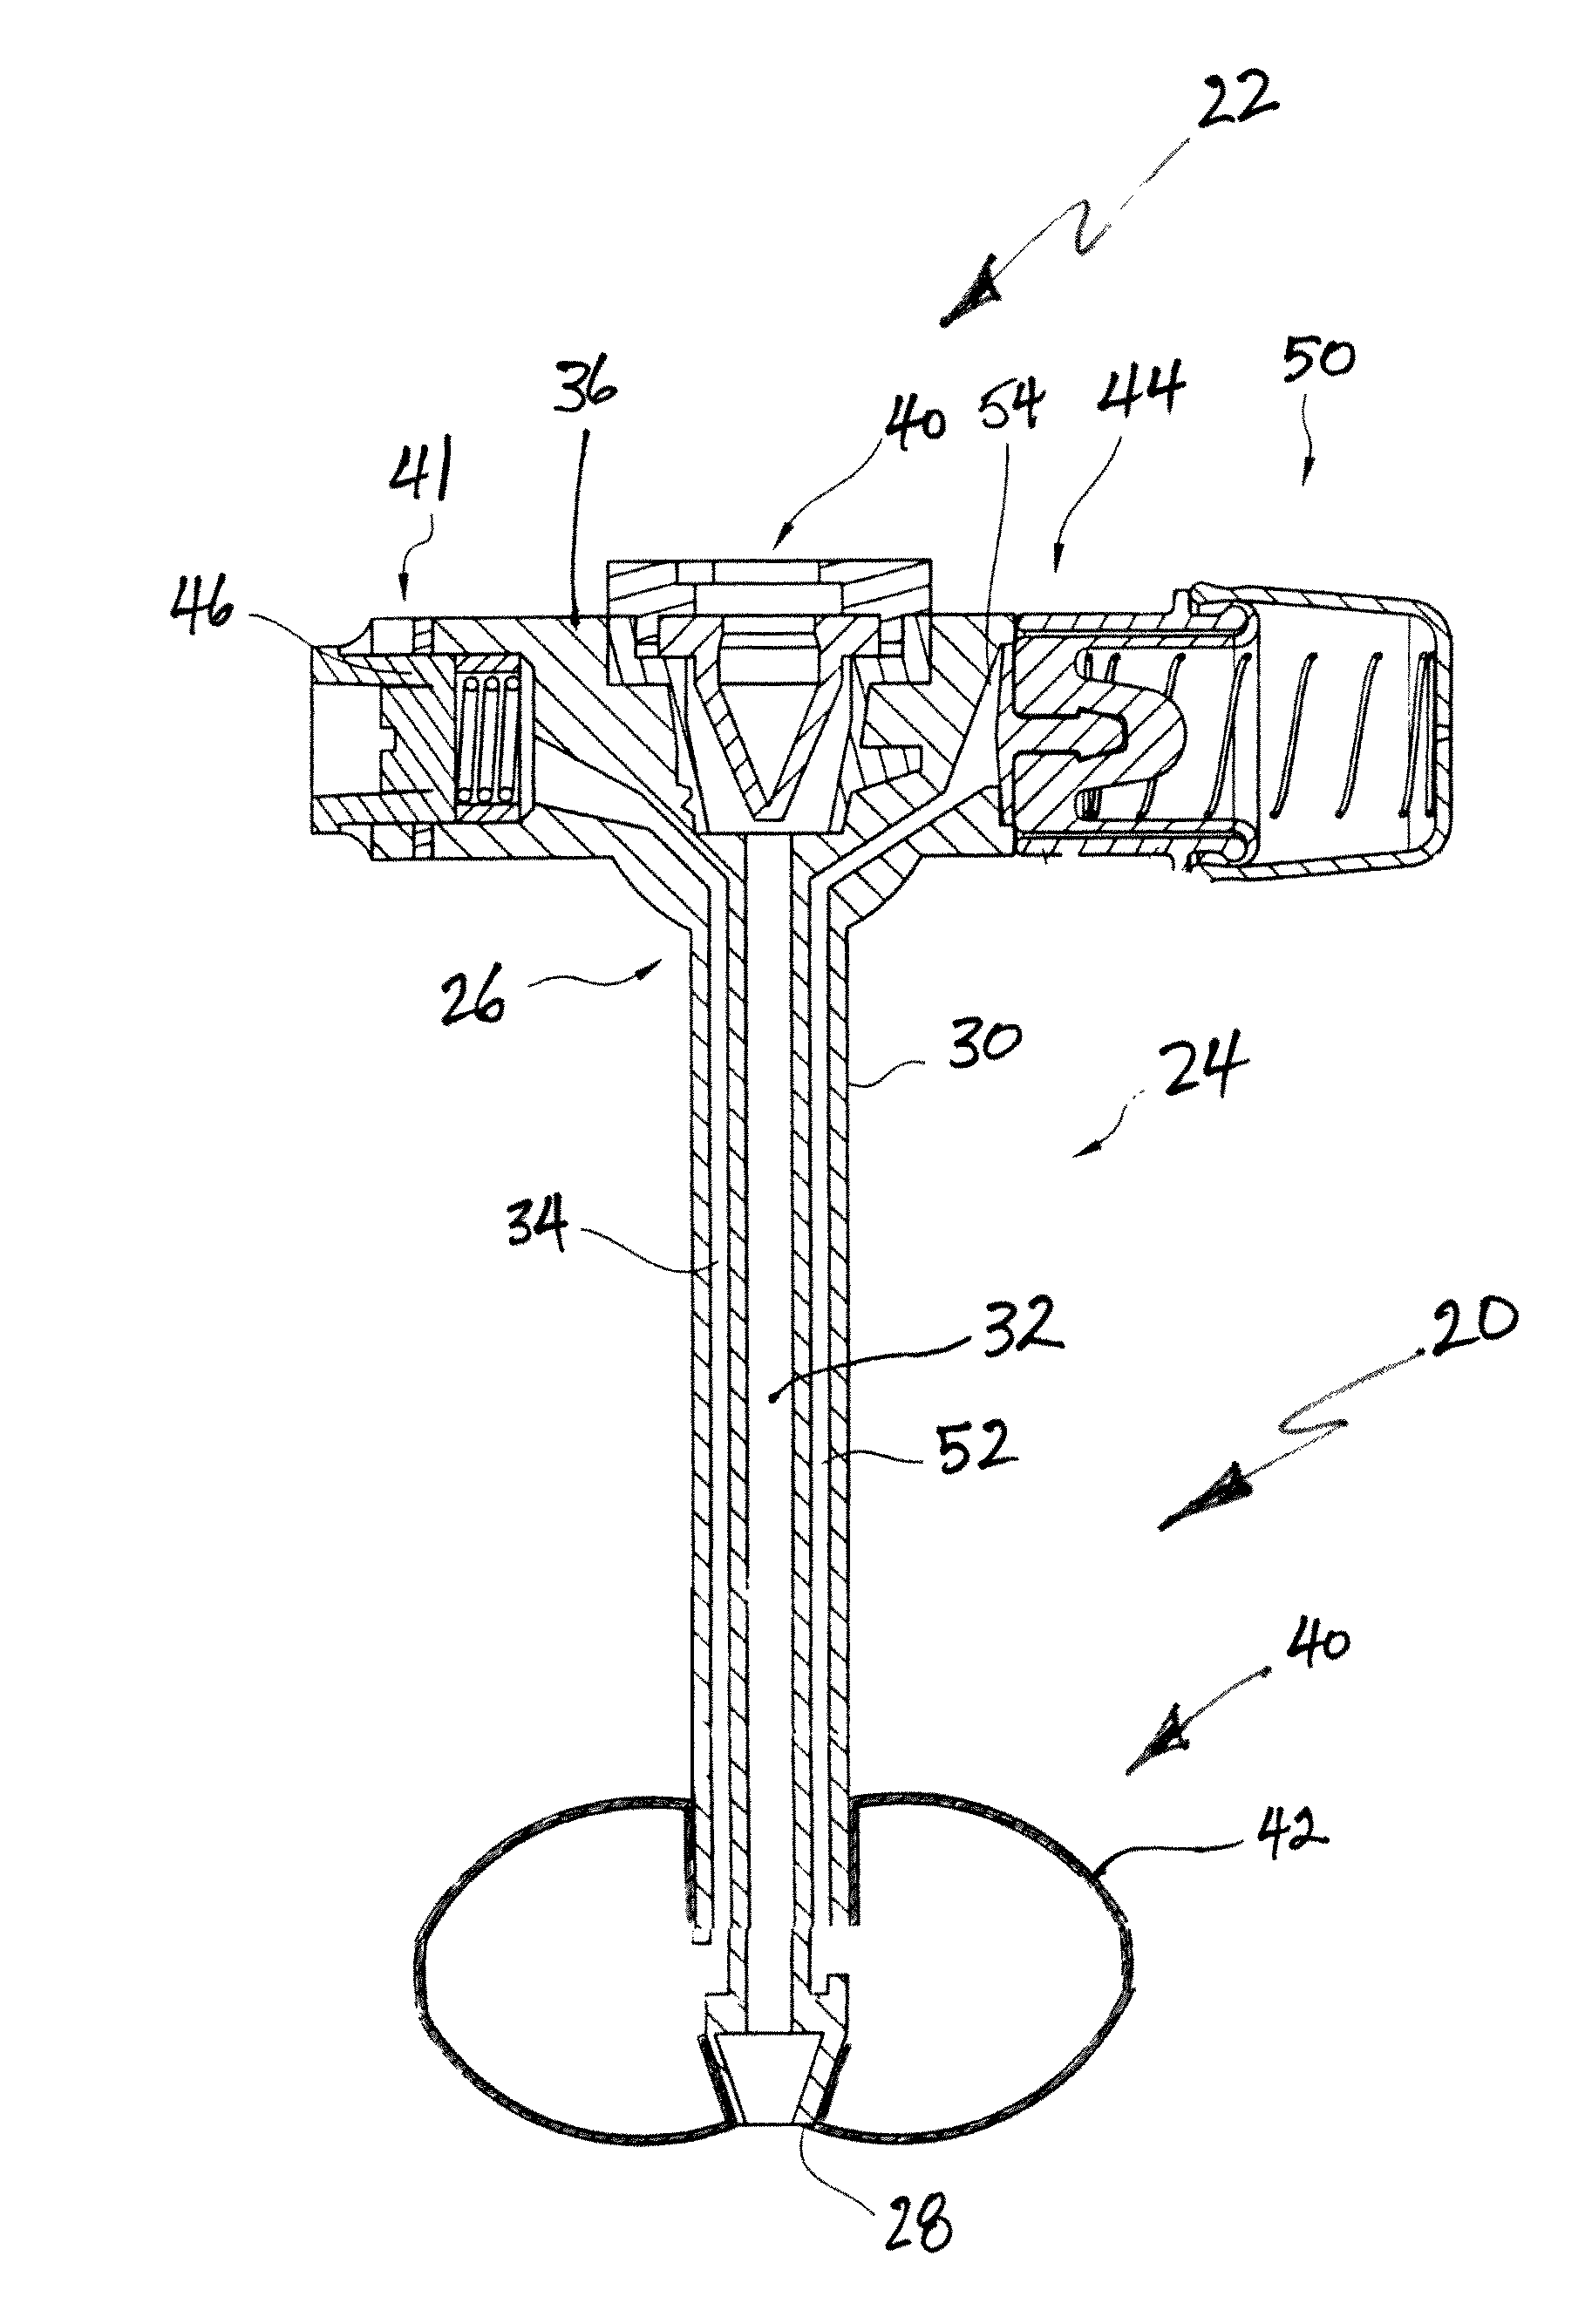 Inflatable retention system for an enteral feeding device